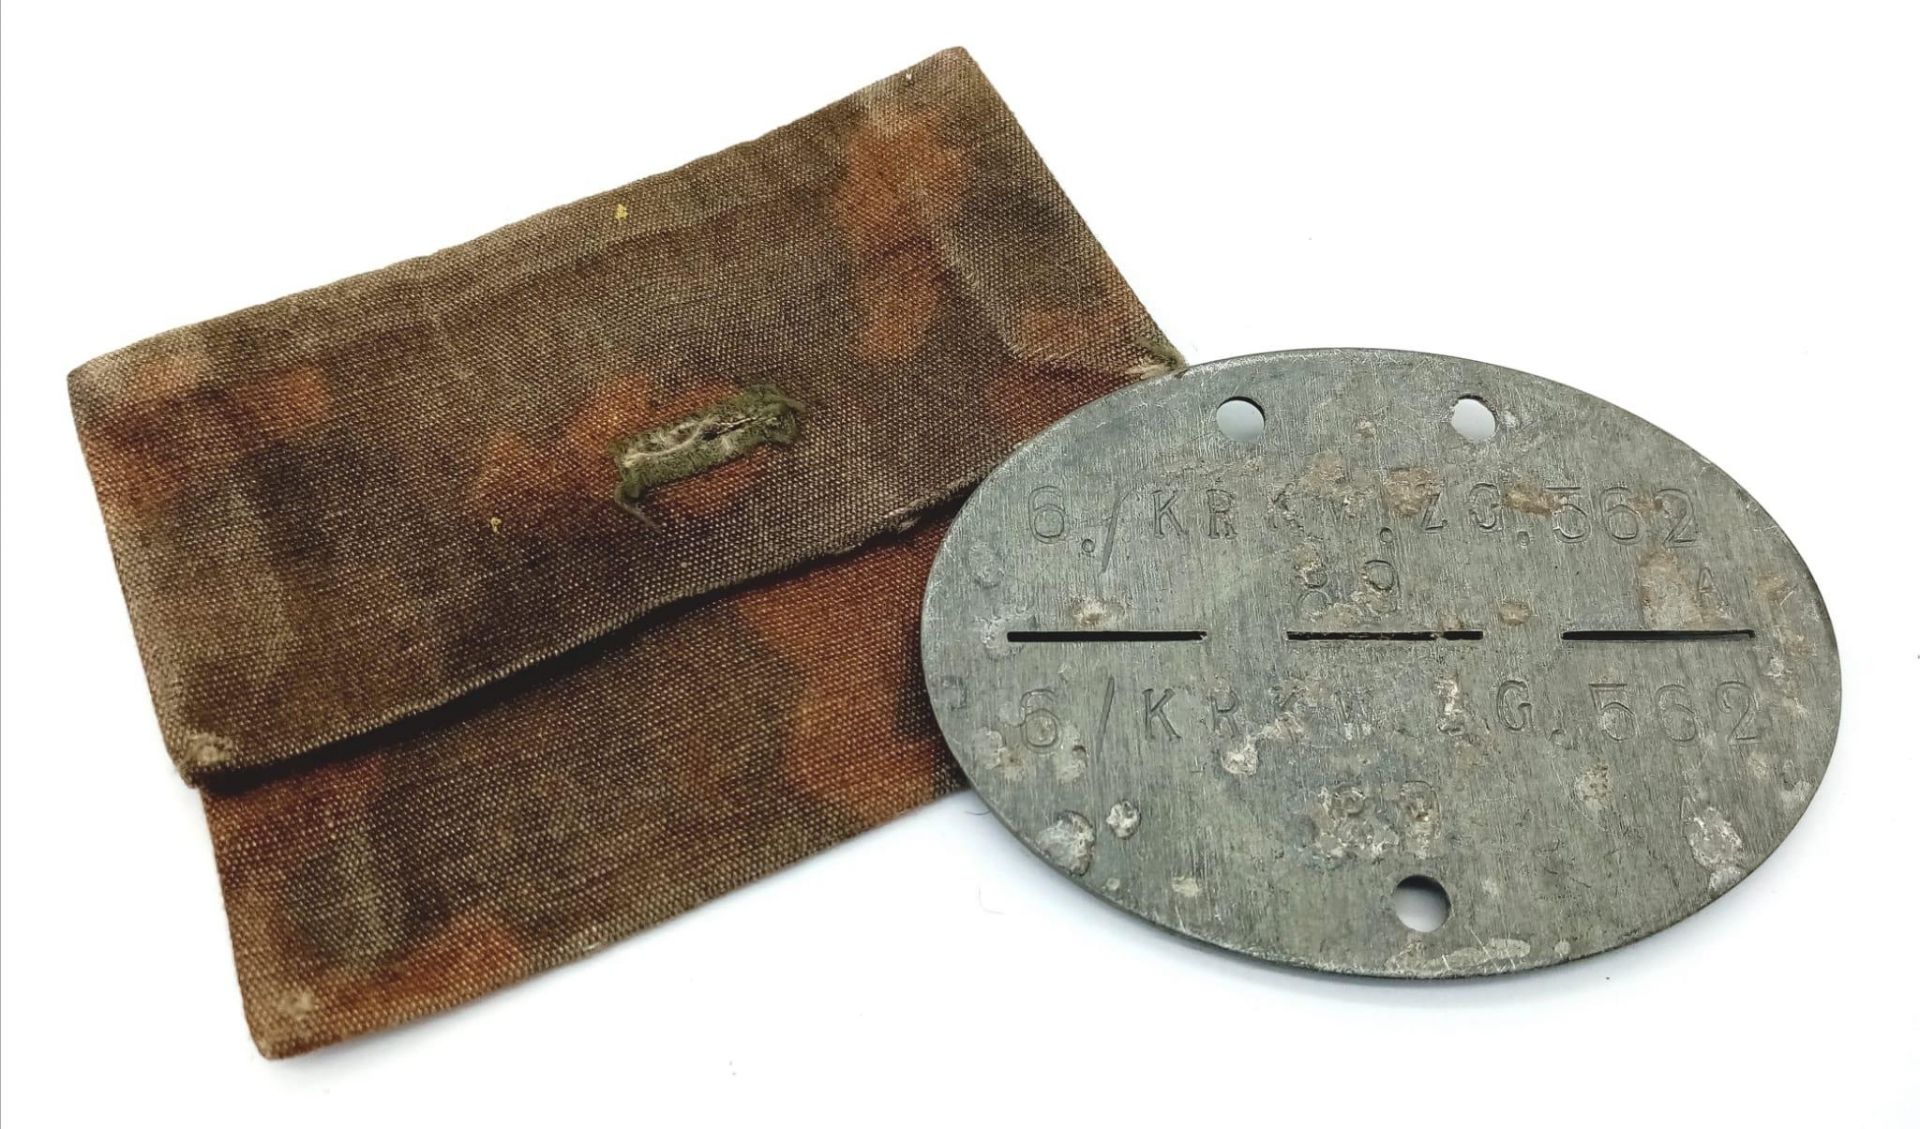 WW2 German Army Dog Tag for an Infantry Driver. The tag comes in a home-made pouch.